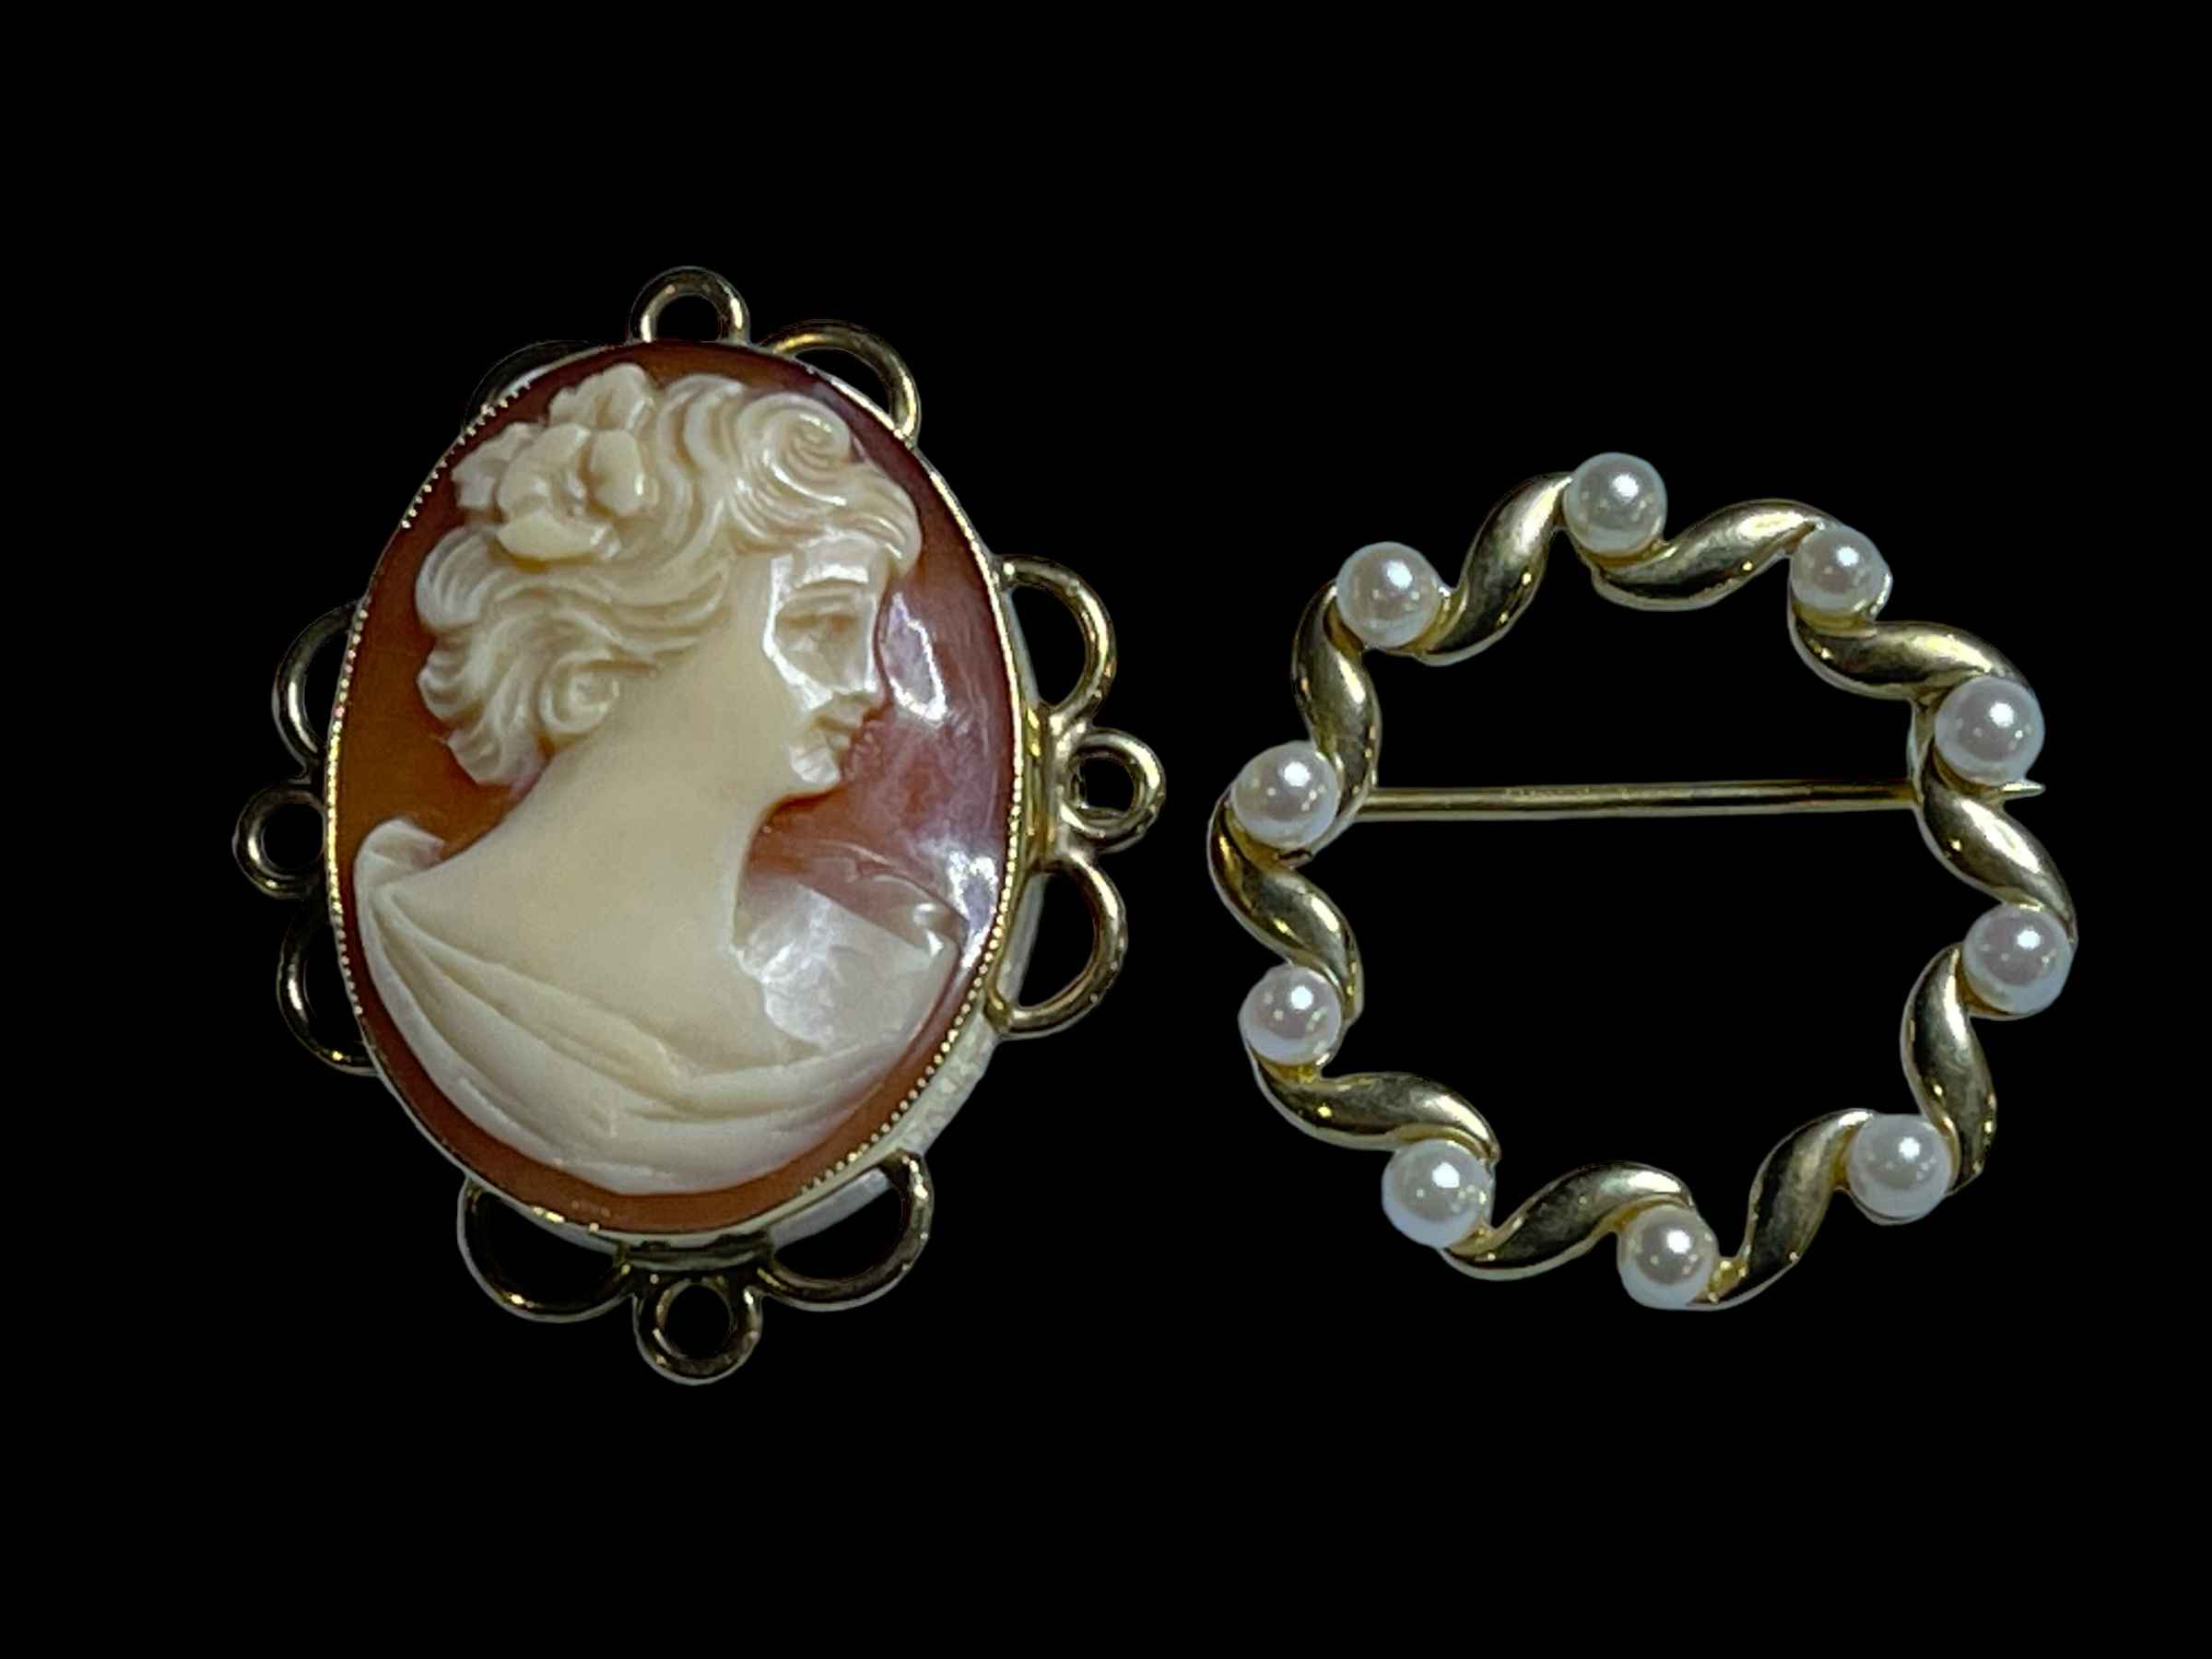 Seed pearl brooch and 9 carat gold cameo brooch (2).